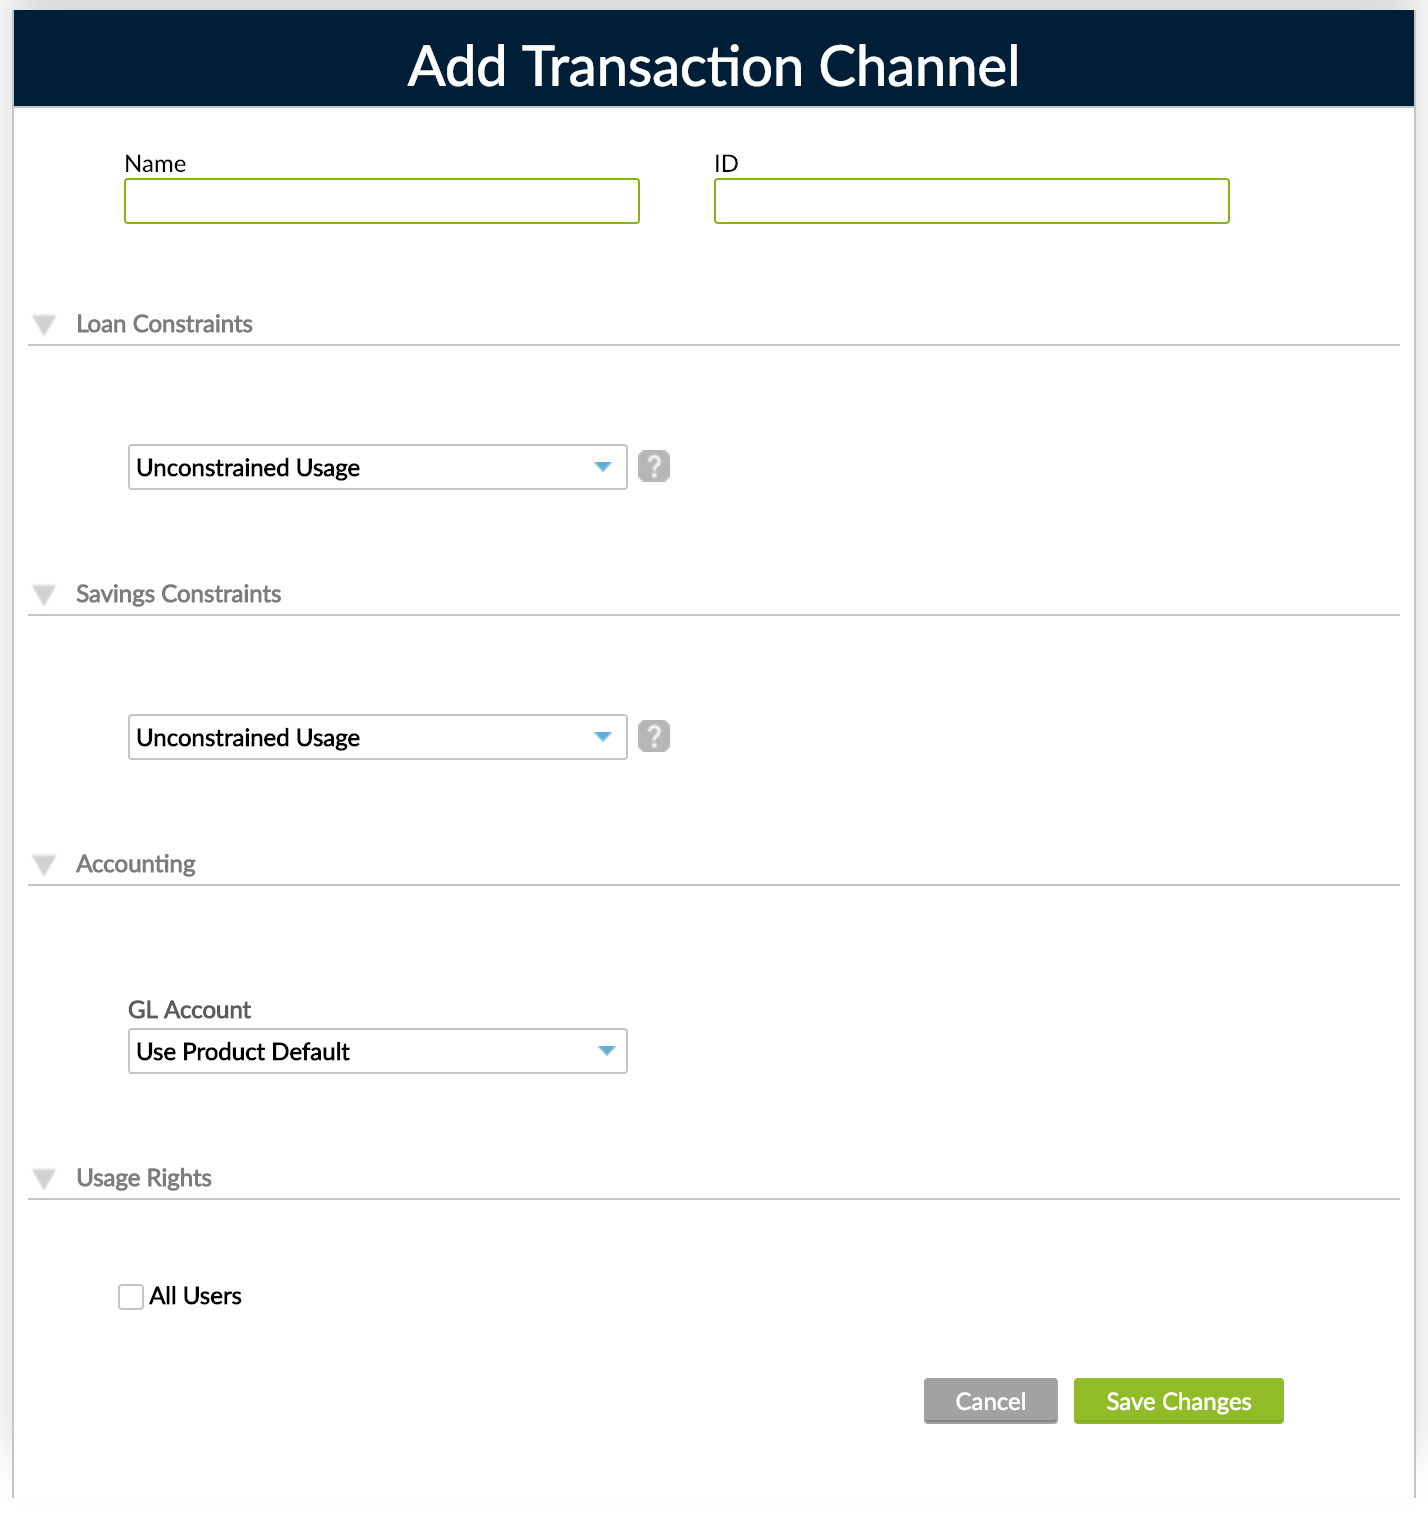 Add Transaction Channel view, that can be accessed by pressing the Add Channel button from the main view.